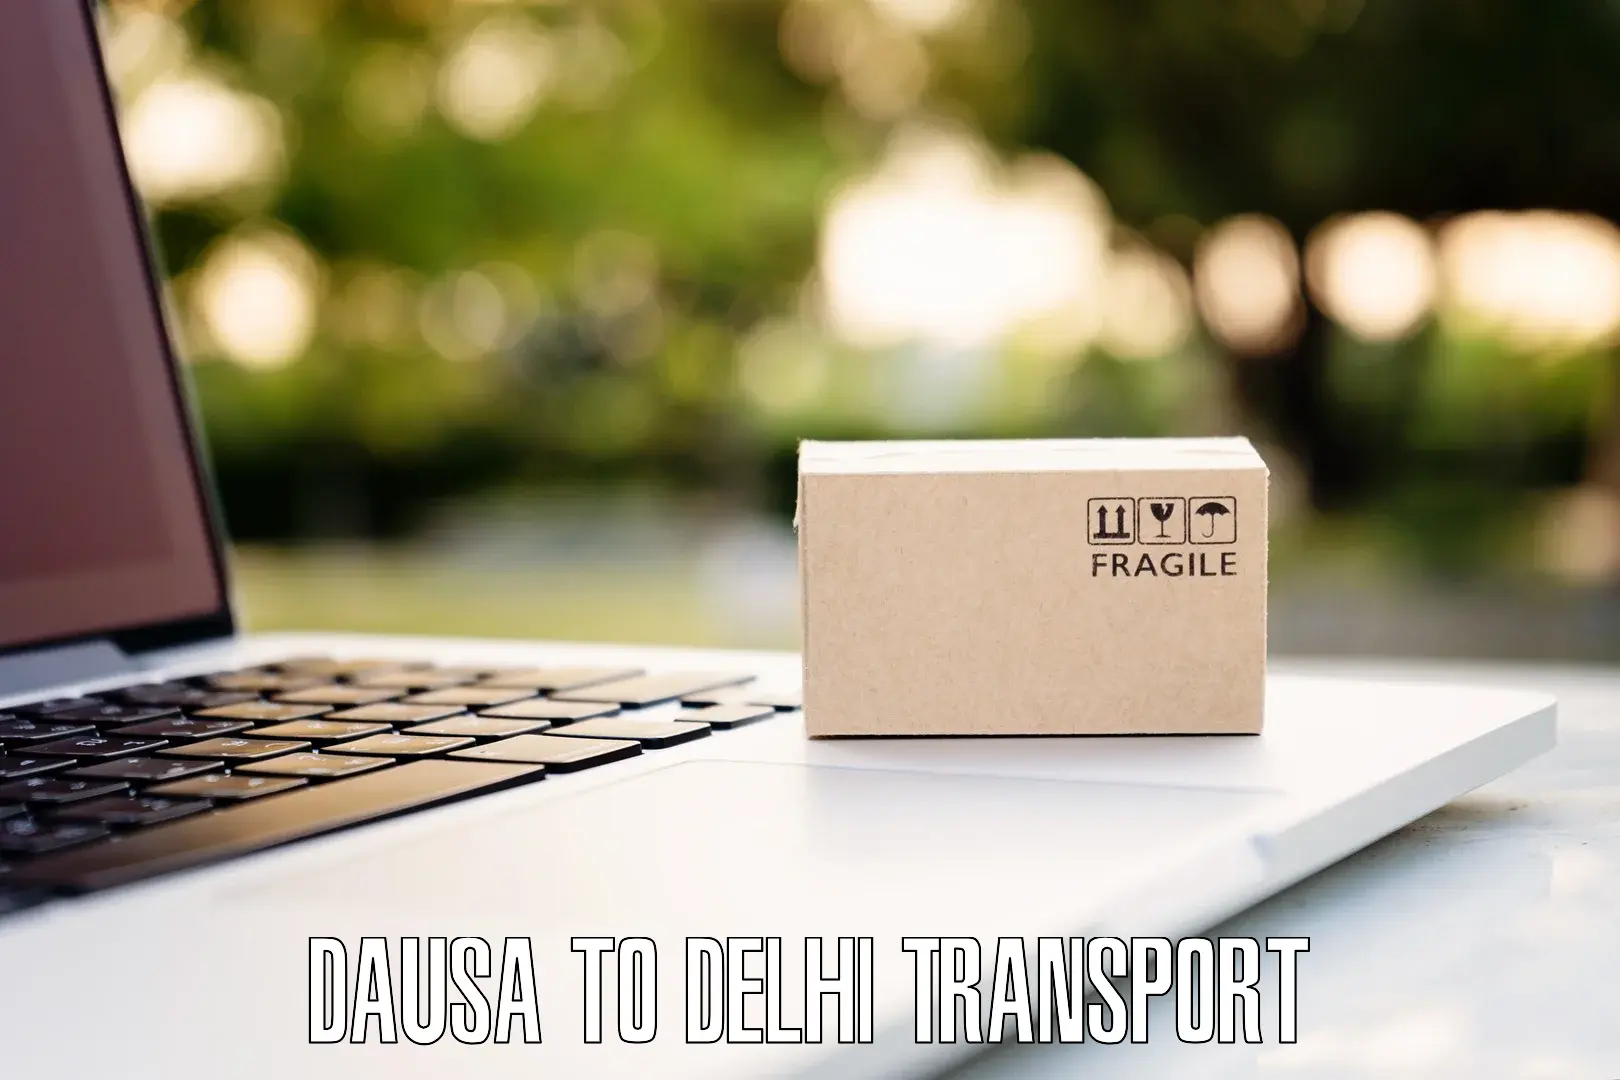 All India transport service Dausa to IIT Delhi